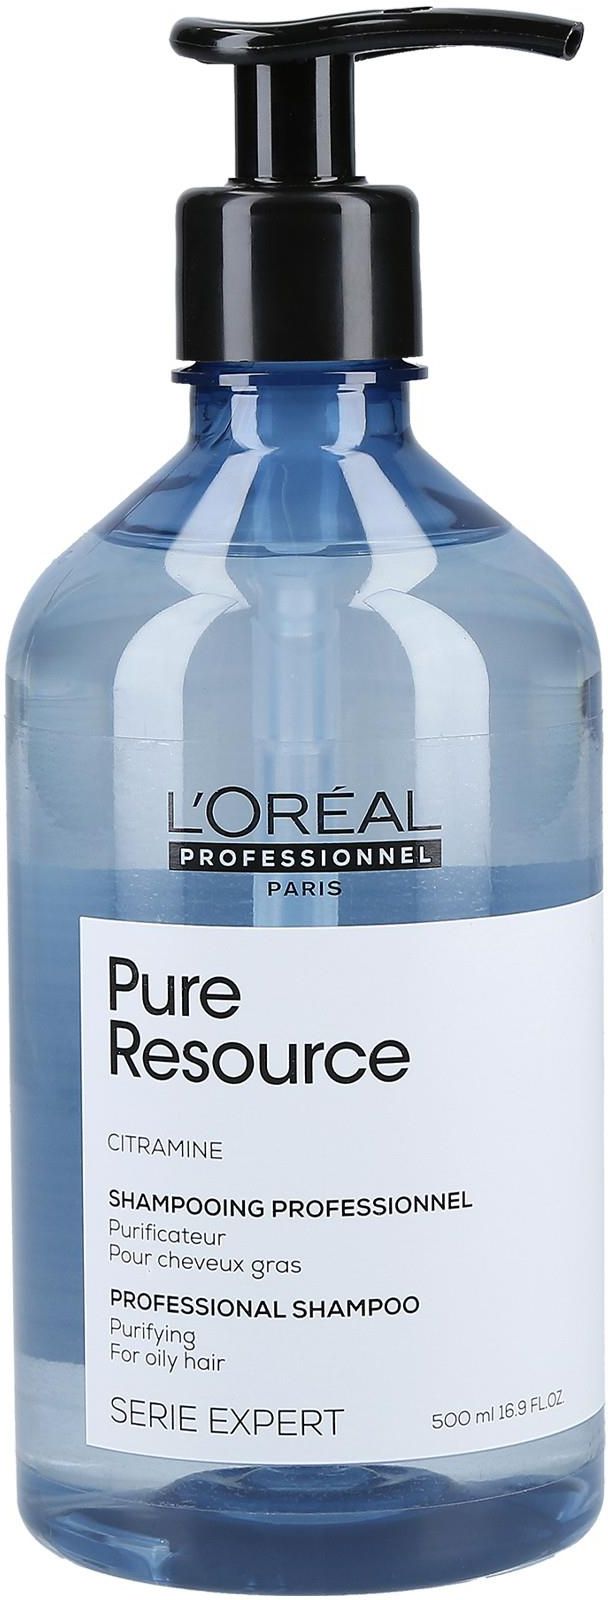 loreal szampon pure resource opinie